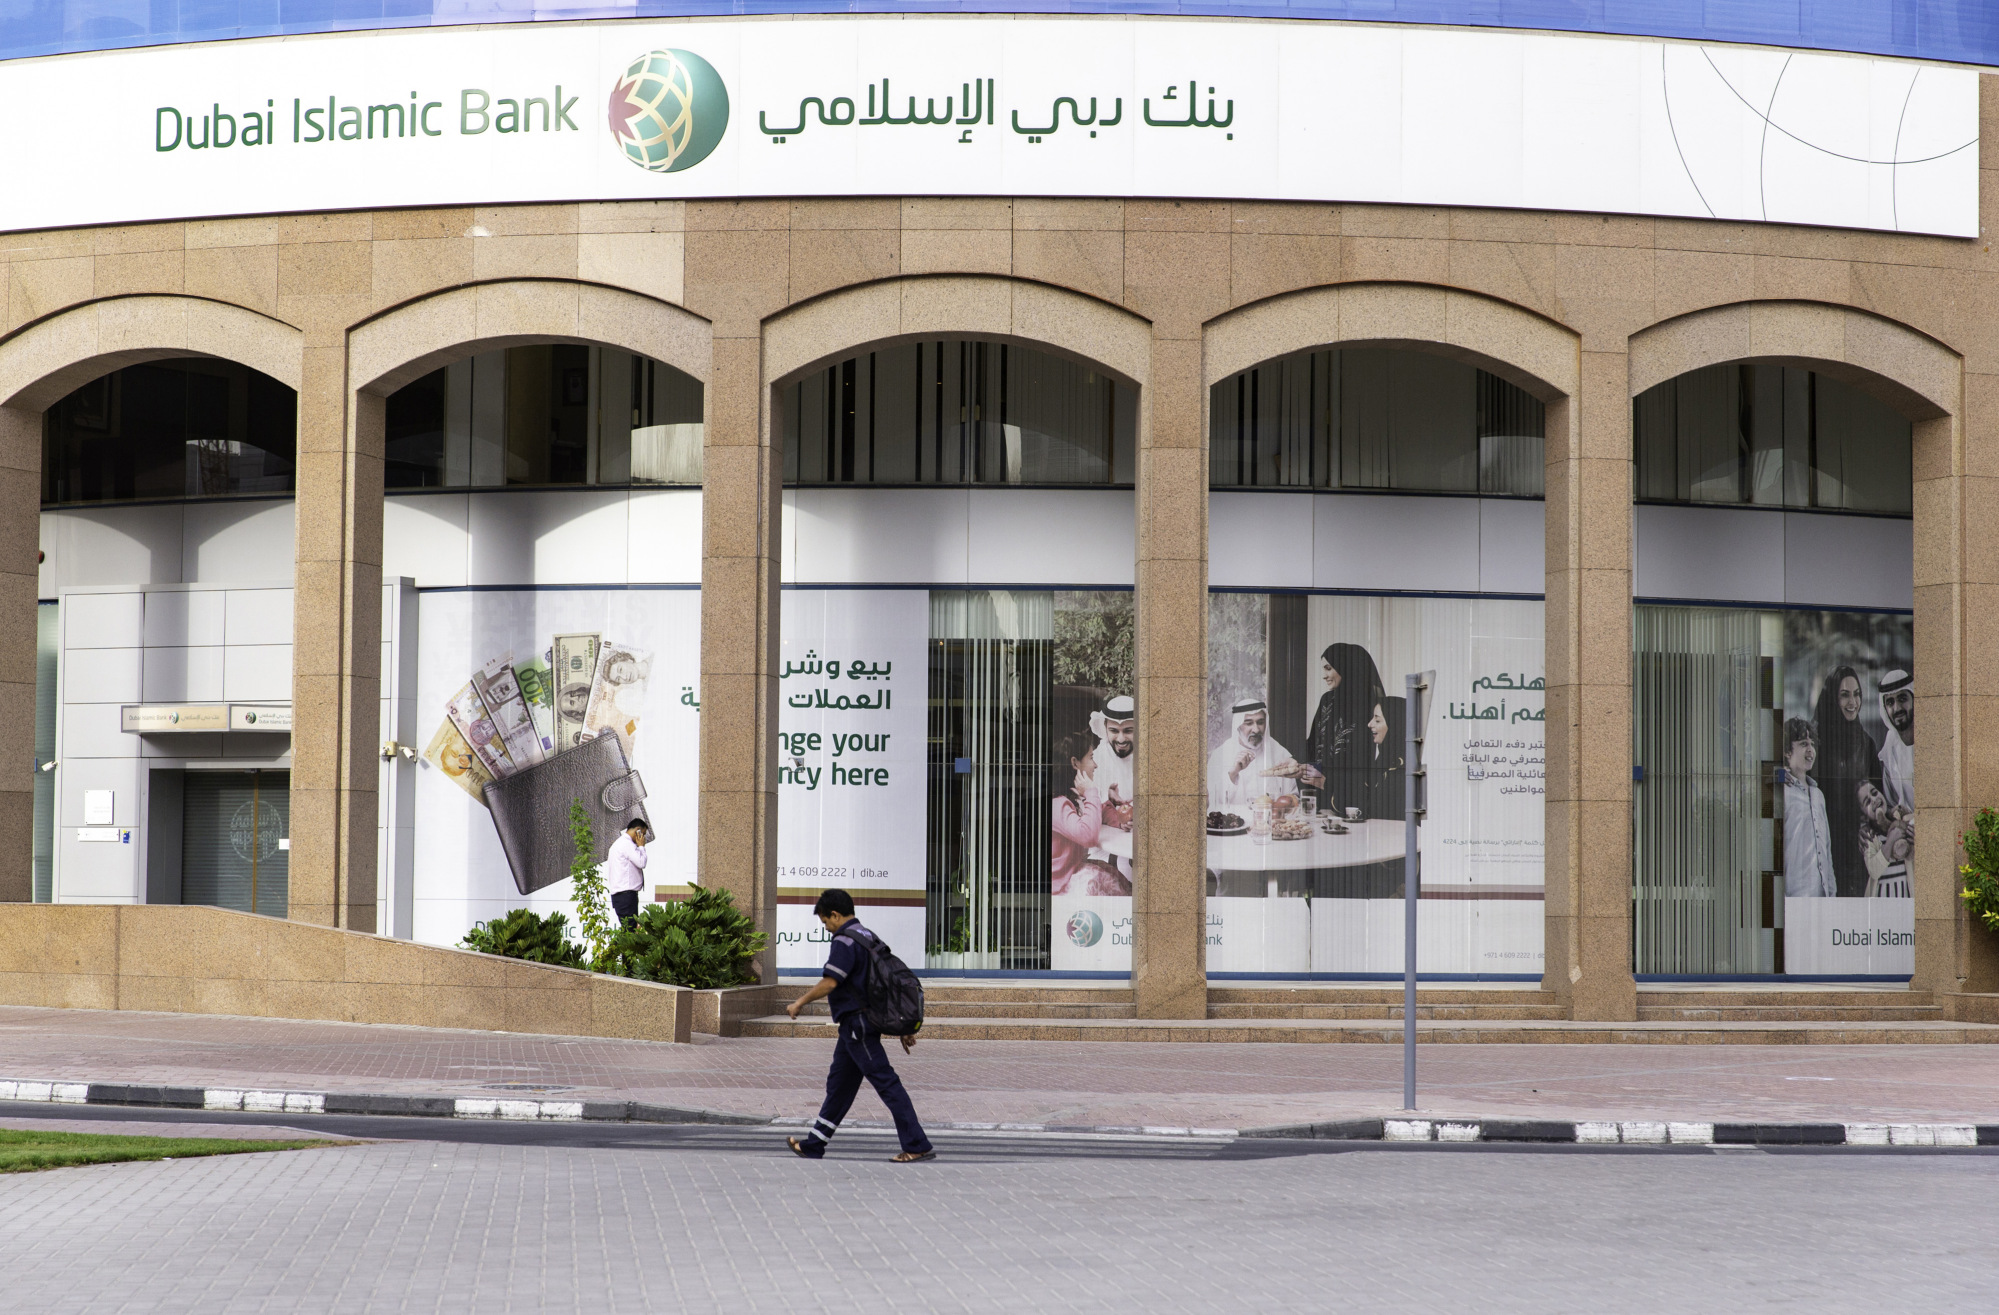 Dubai Islamic Bank Hungers for Growth, Scouts Out Deals - Bloomberg